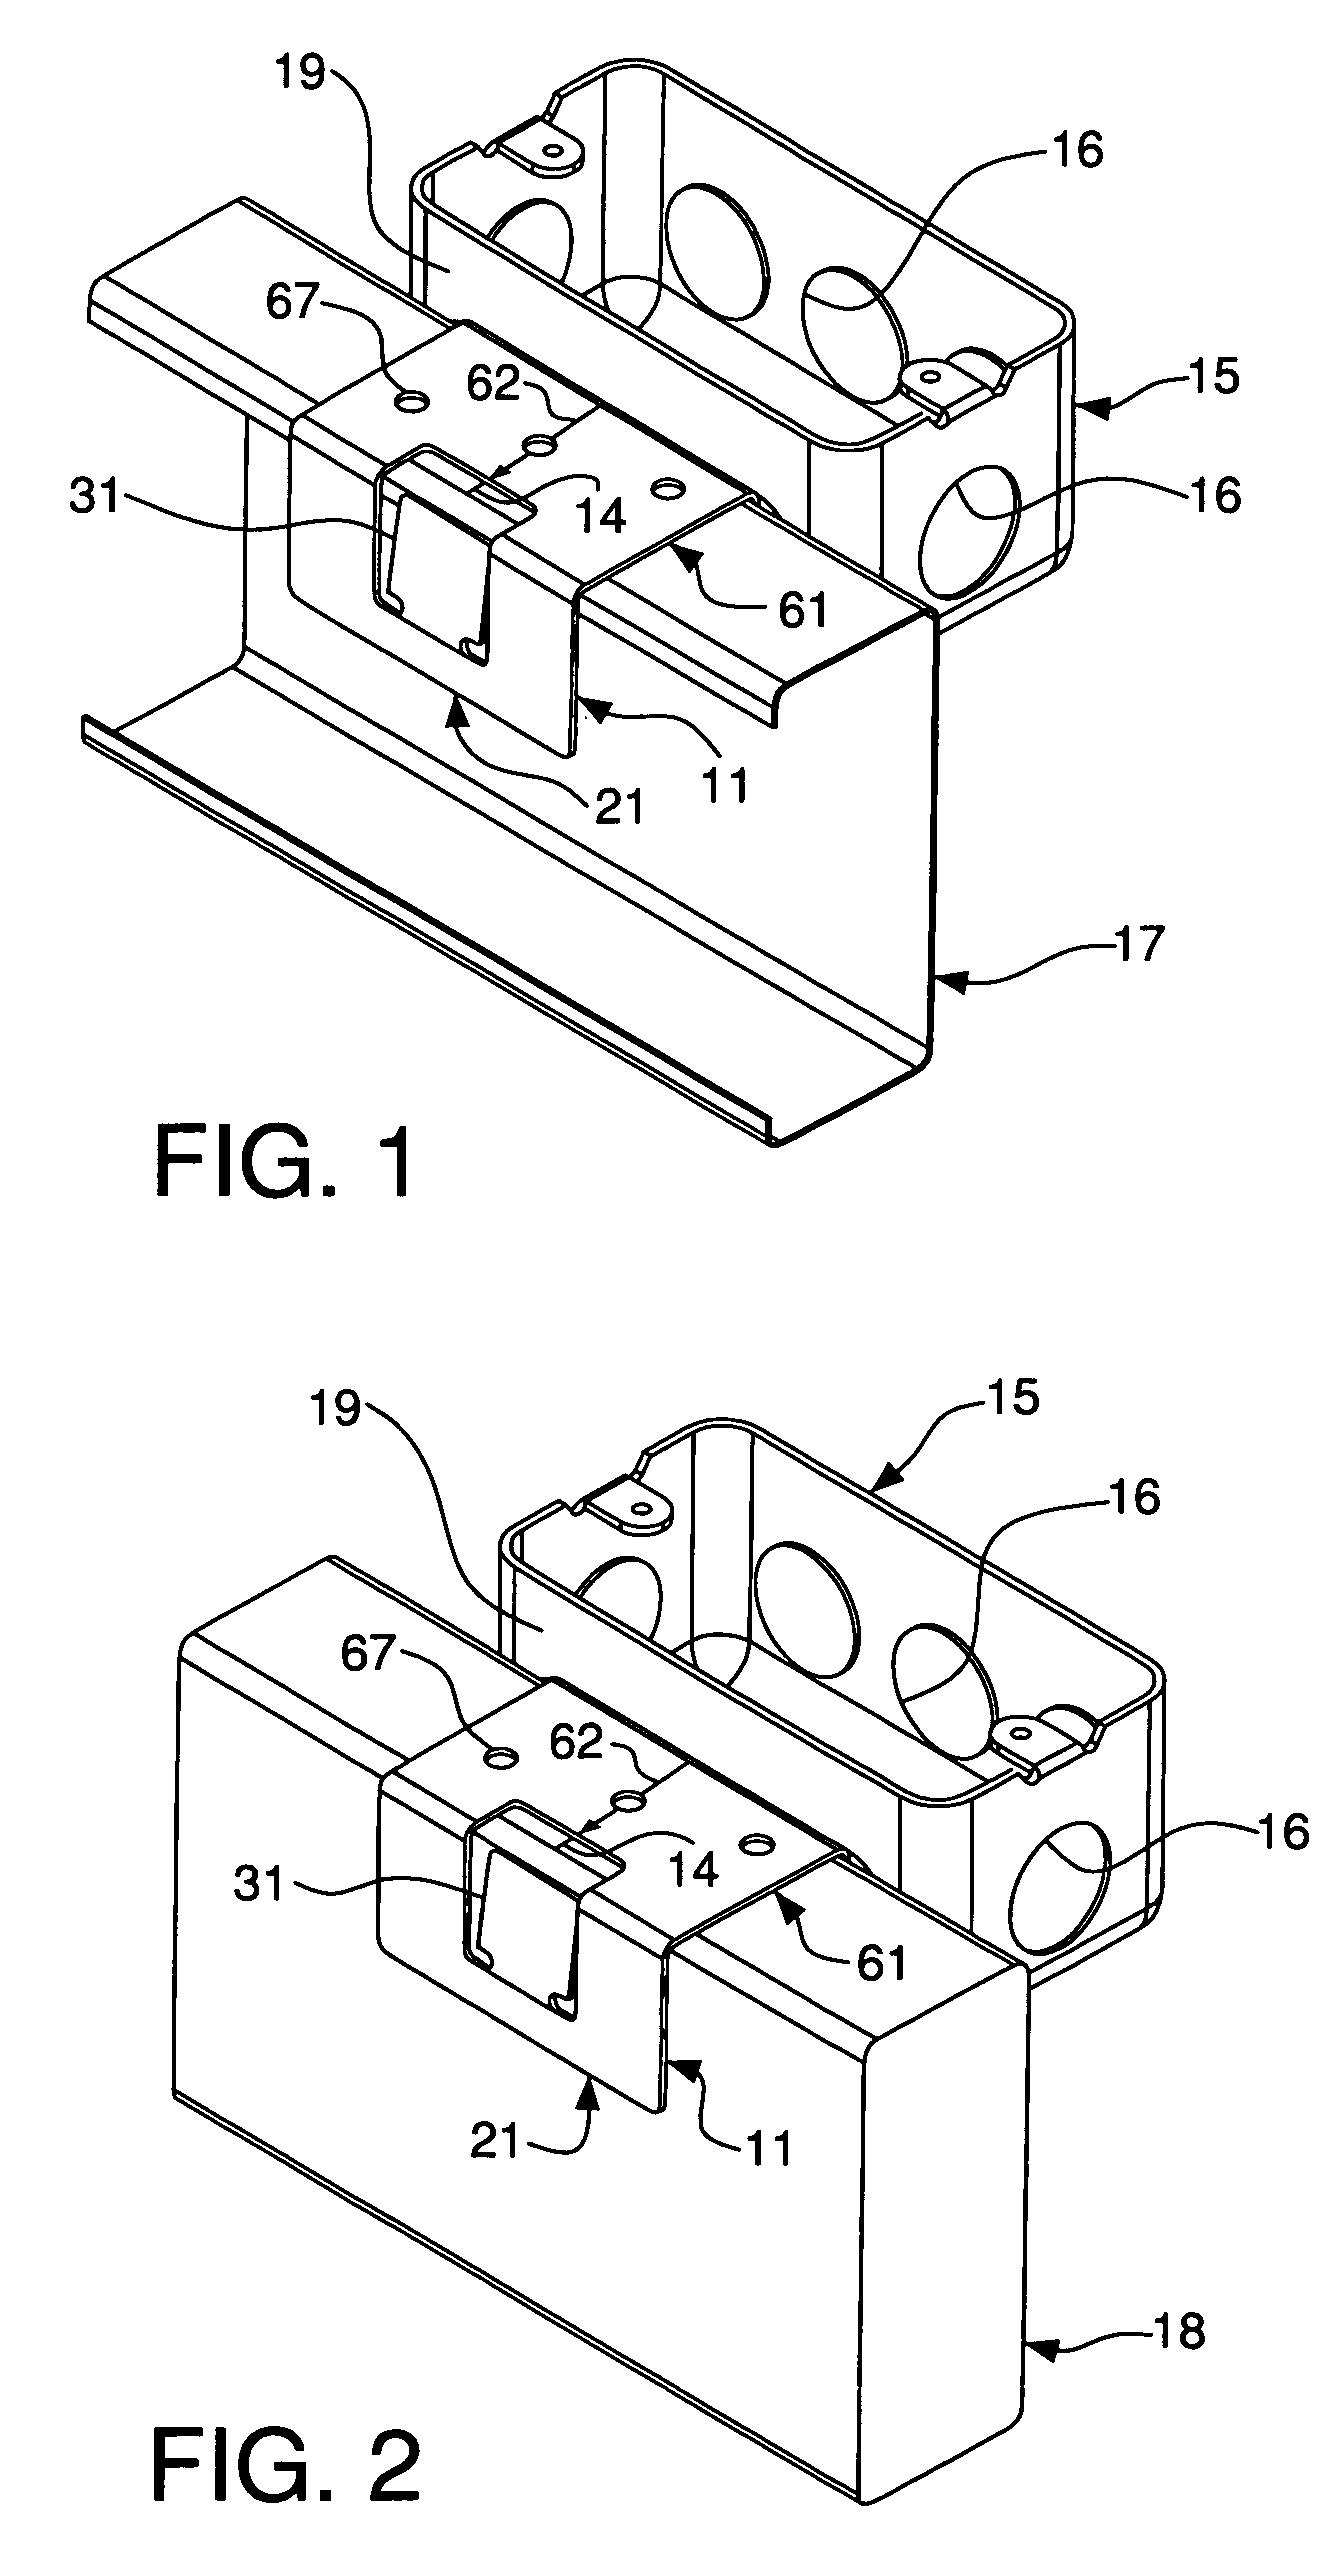 Adjustable bracket for securing an electrical box to a stud